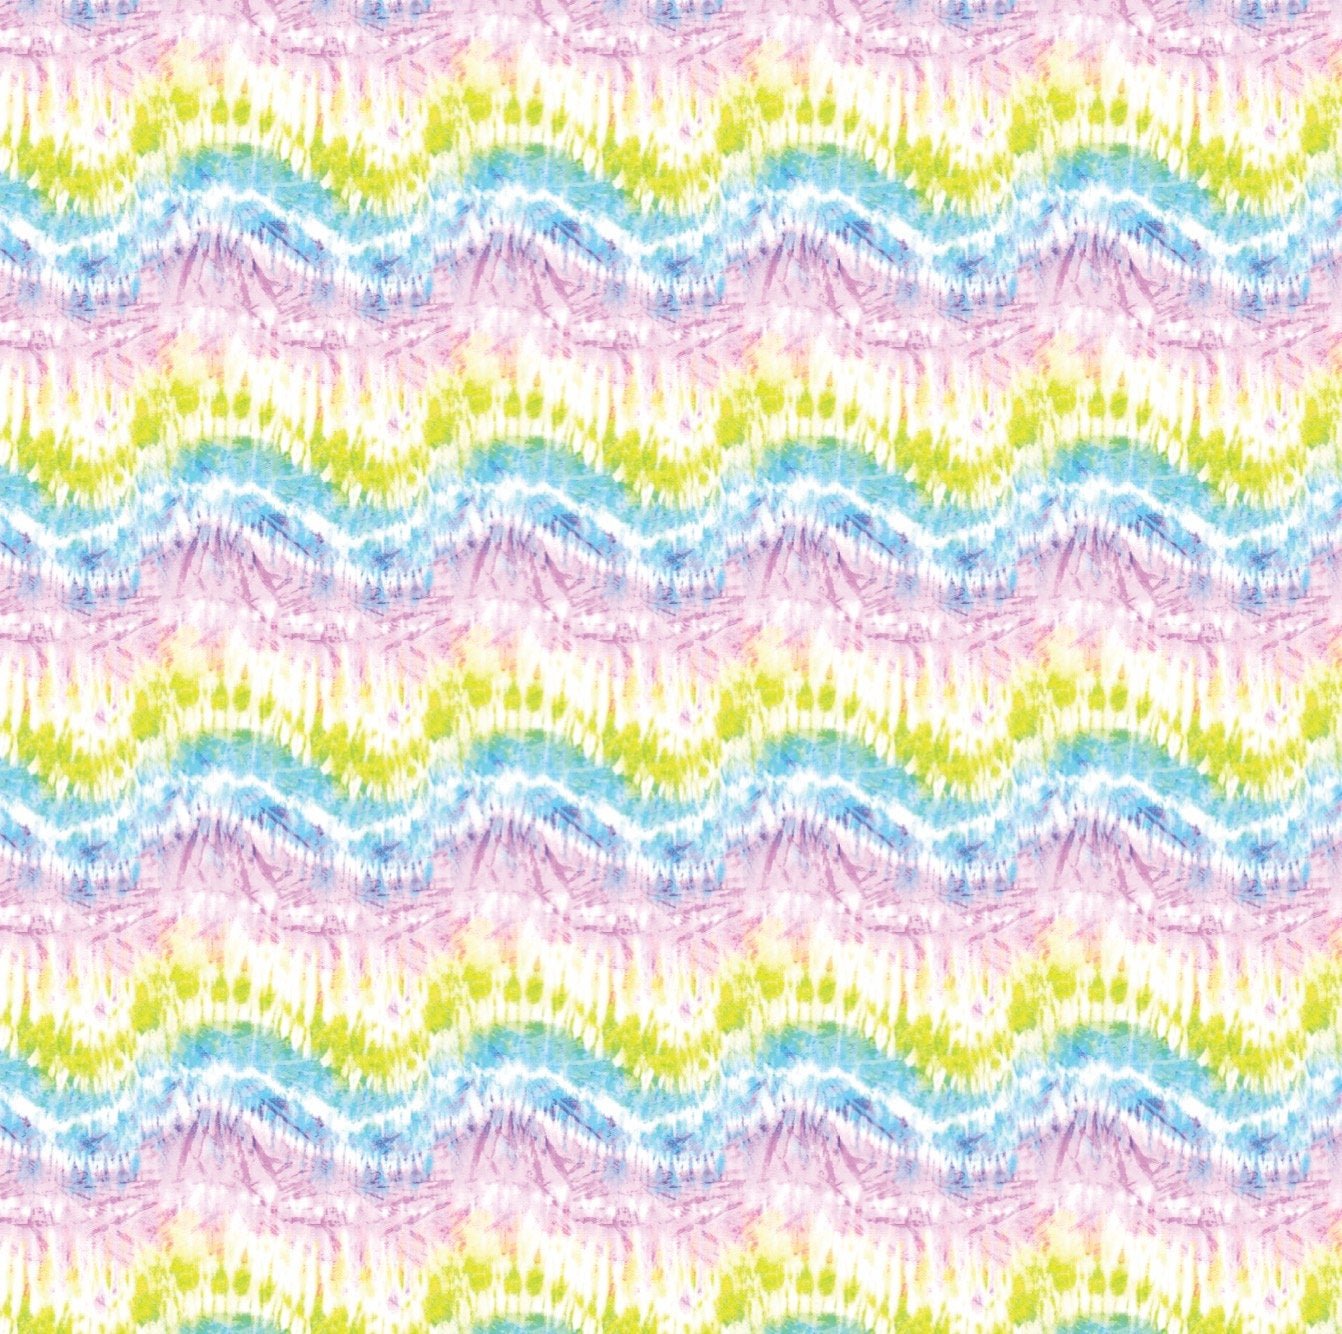 Tie Dye Wrapping Paper - Stesha Party